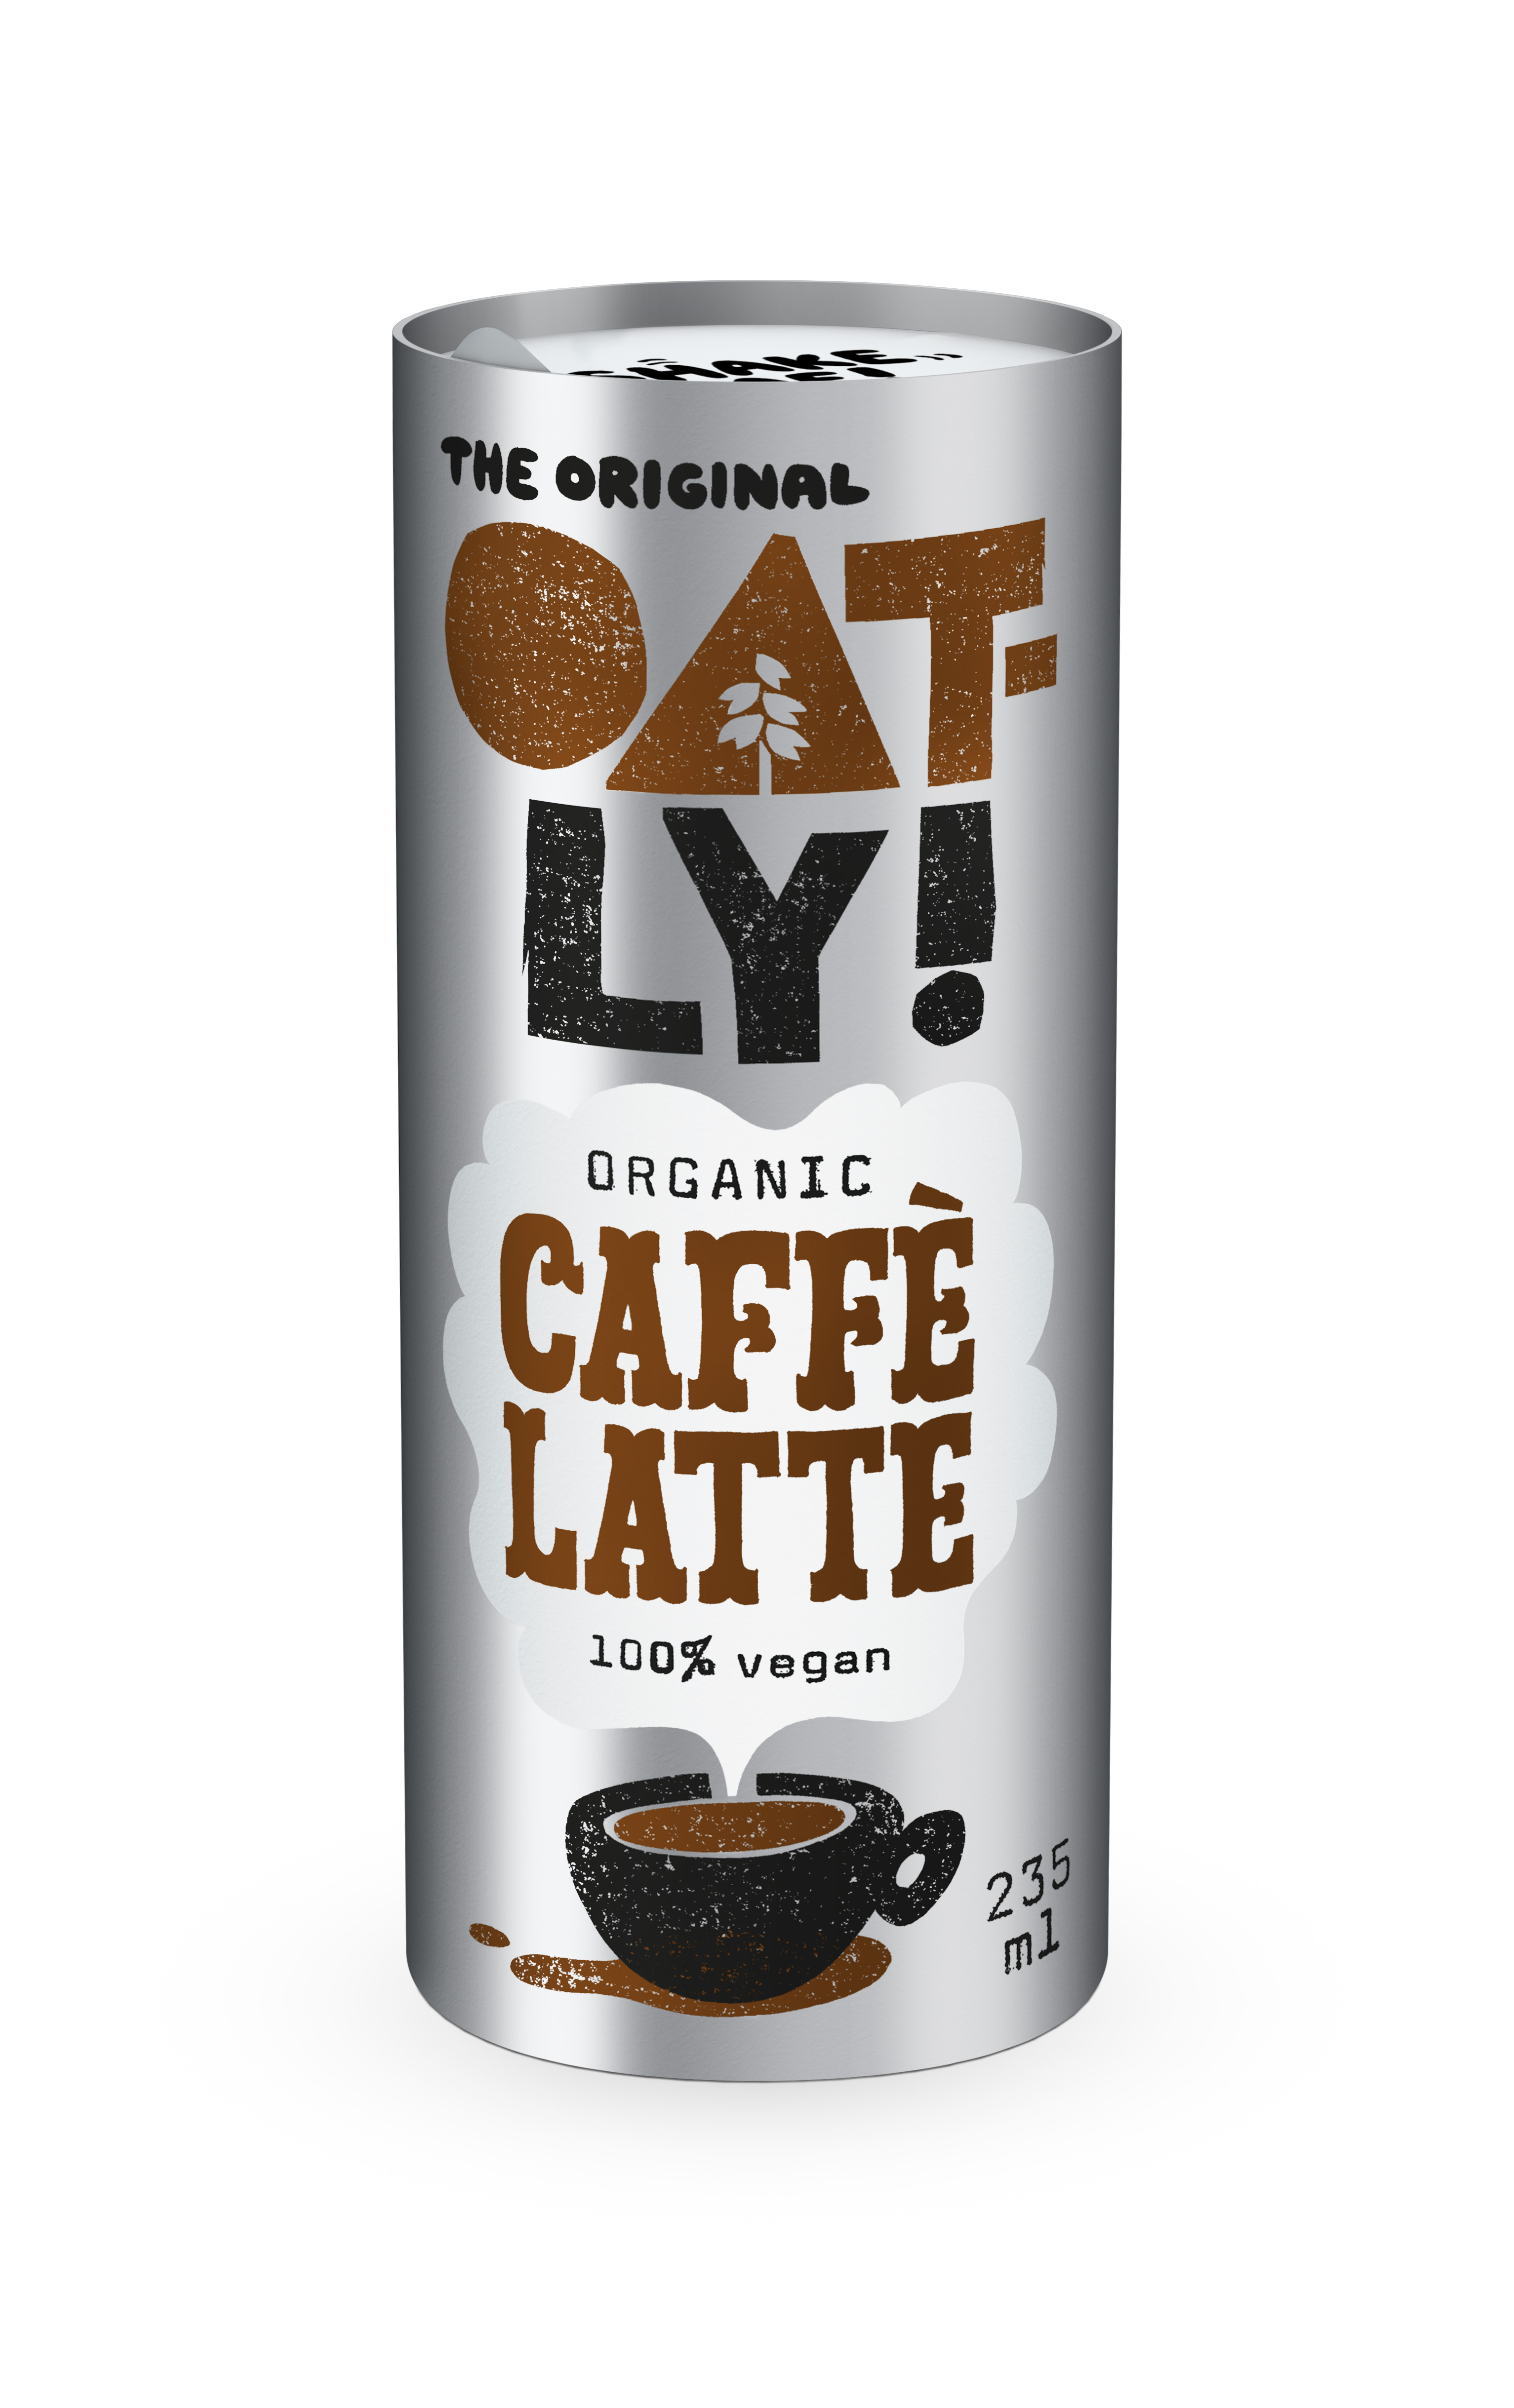 OATLY TAKES TO THE SKIES; SIGNS FIRST GLOBAL AIRLINE PARTNERSHIP WITH SWISS INTERNATIONAL AIR LINES